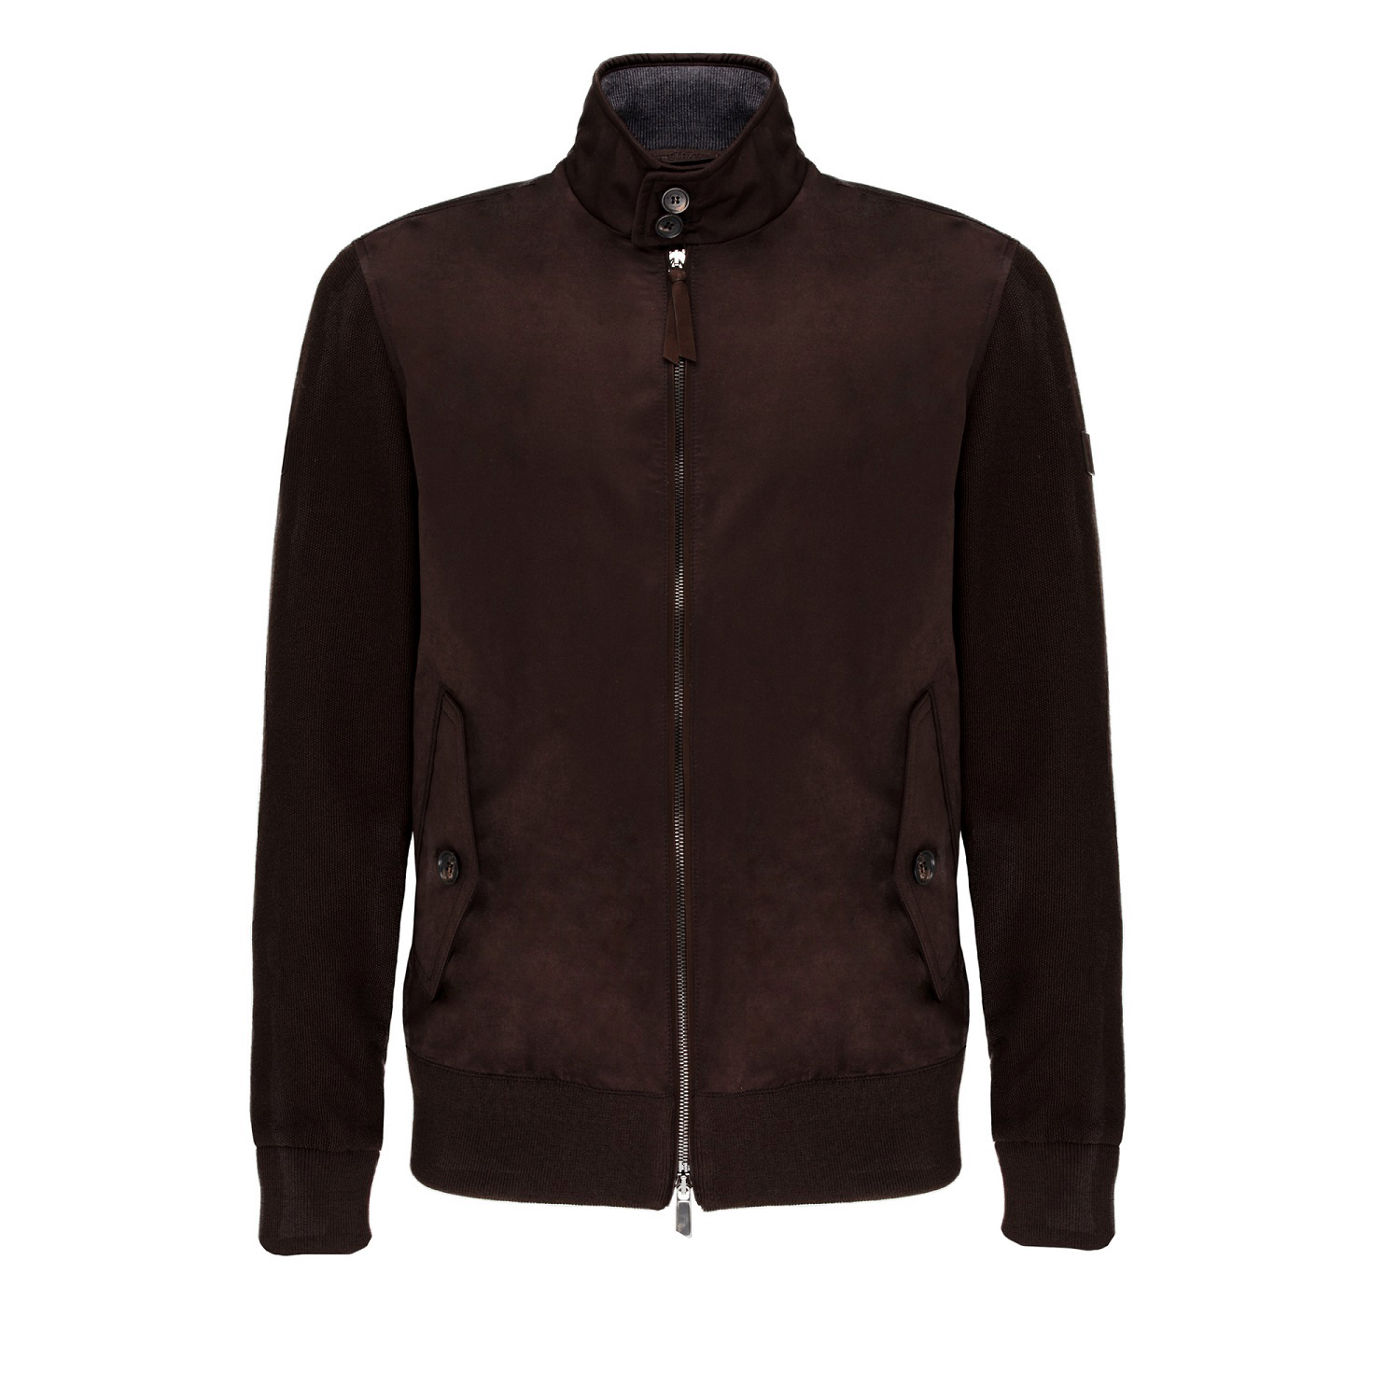 Fall-Winter Jacket designed by Zegna